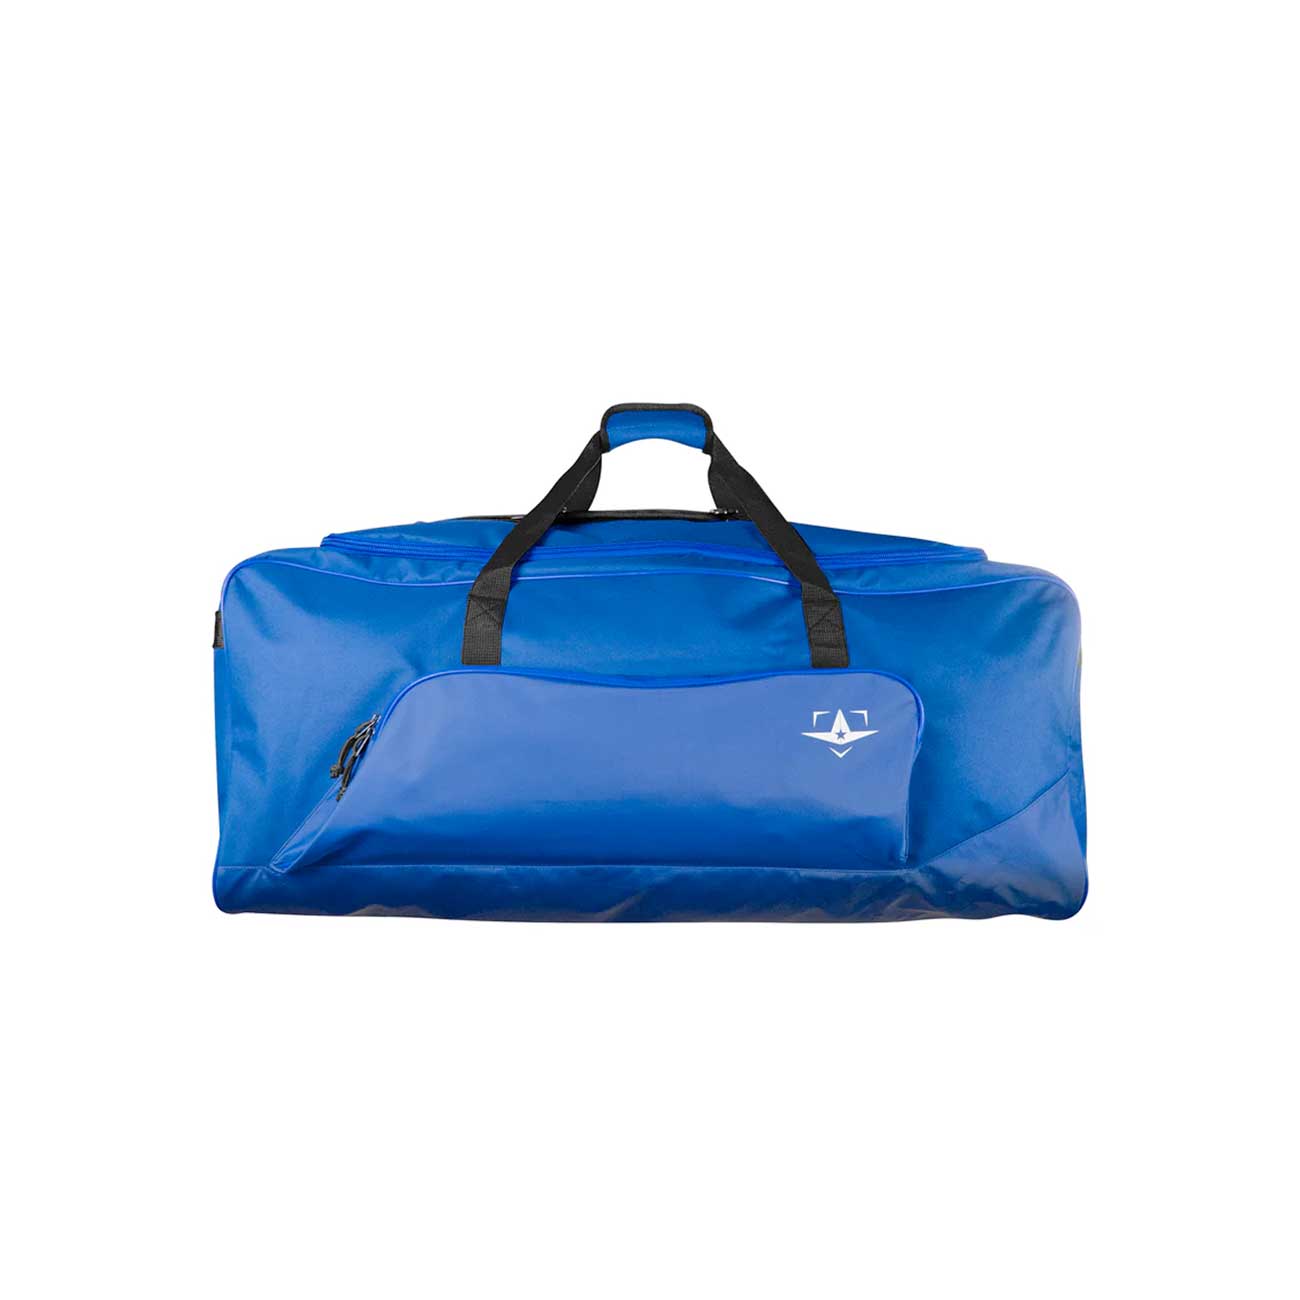 All-Star Classic Pro Carry Bag